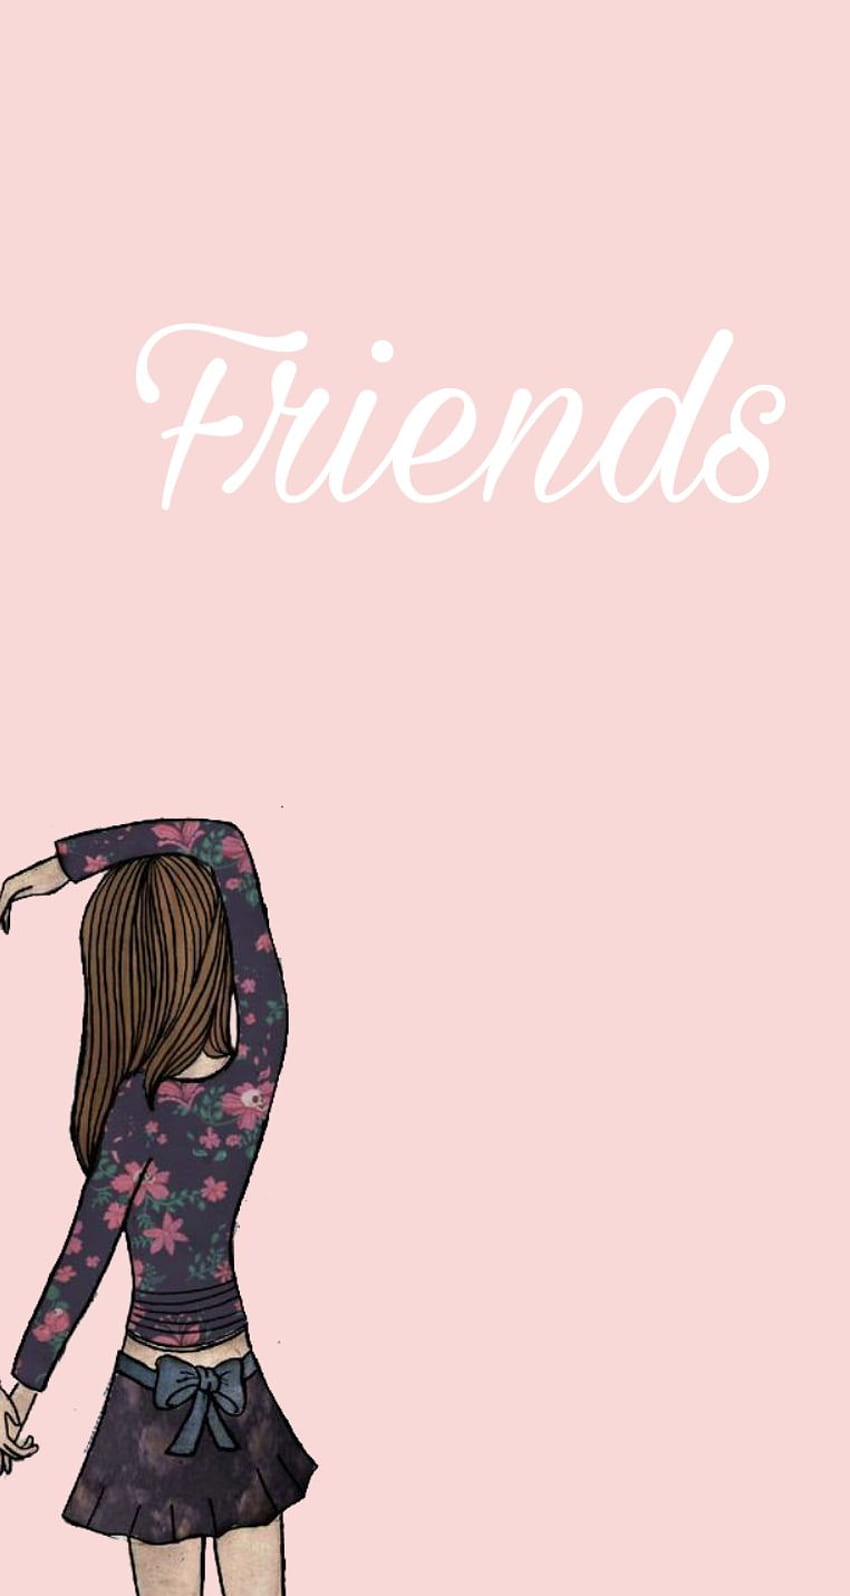 Other half of the best friends cute pink for iPhone. Friends , Best friend , Best friends cartoon, Couple Half HD phone wallpaper